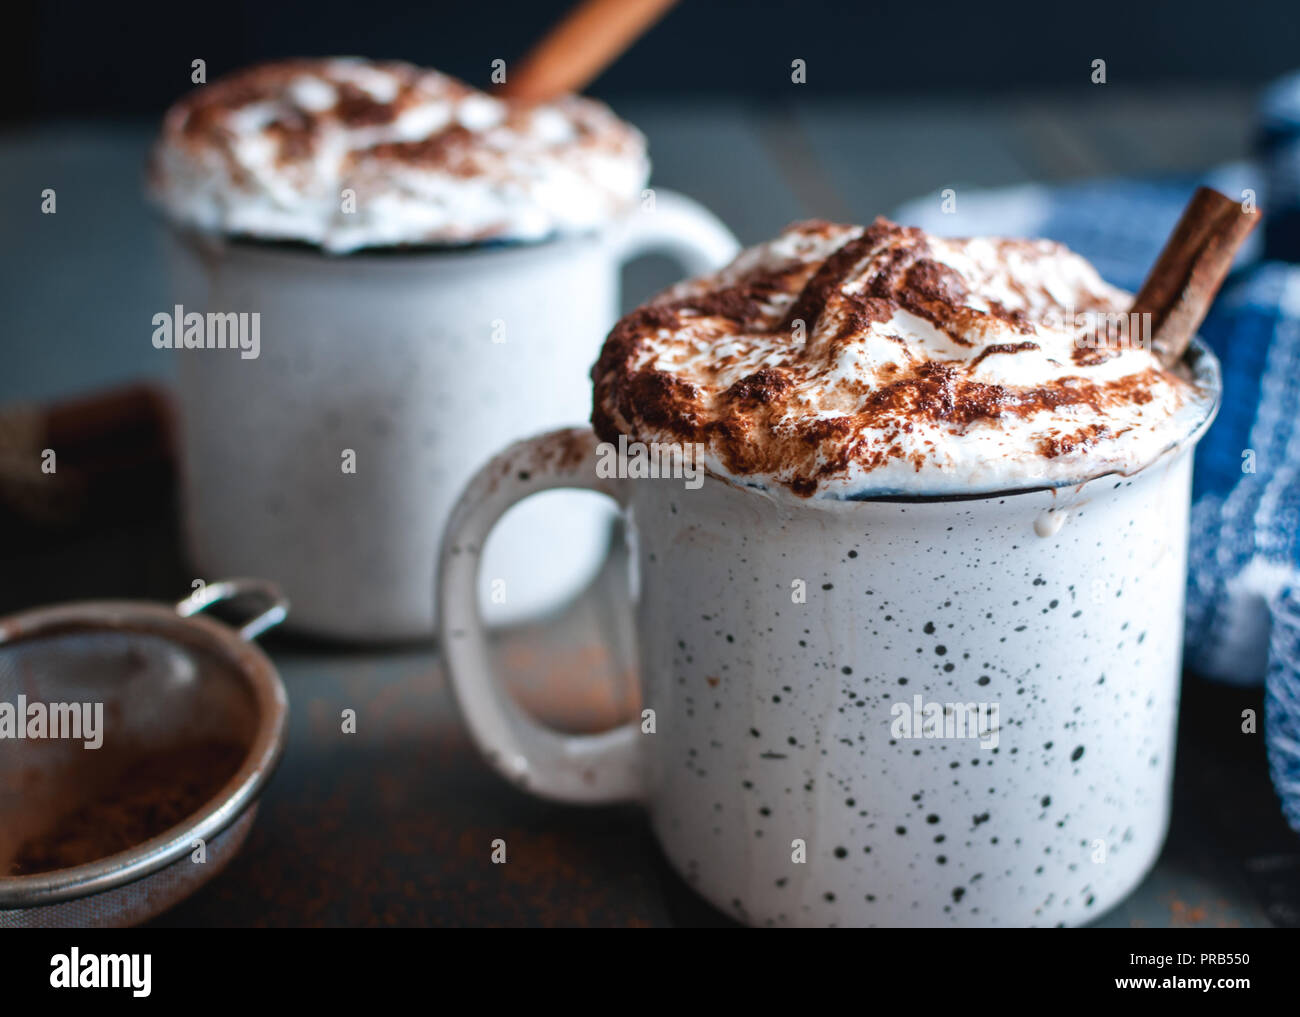 Close-up of hot cocoa with whipped cream and cinnamon stick on dark background Stock Photo